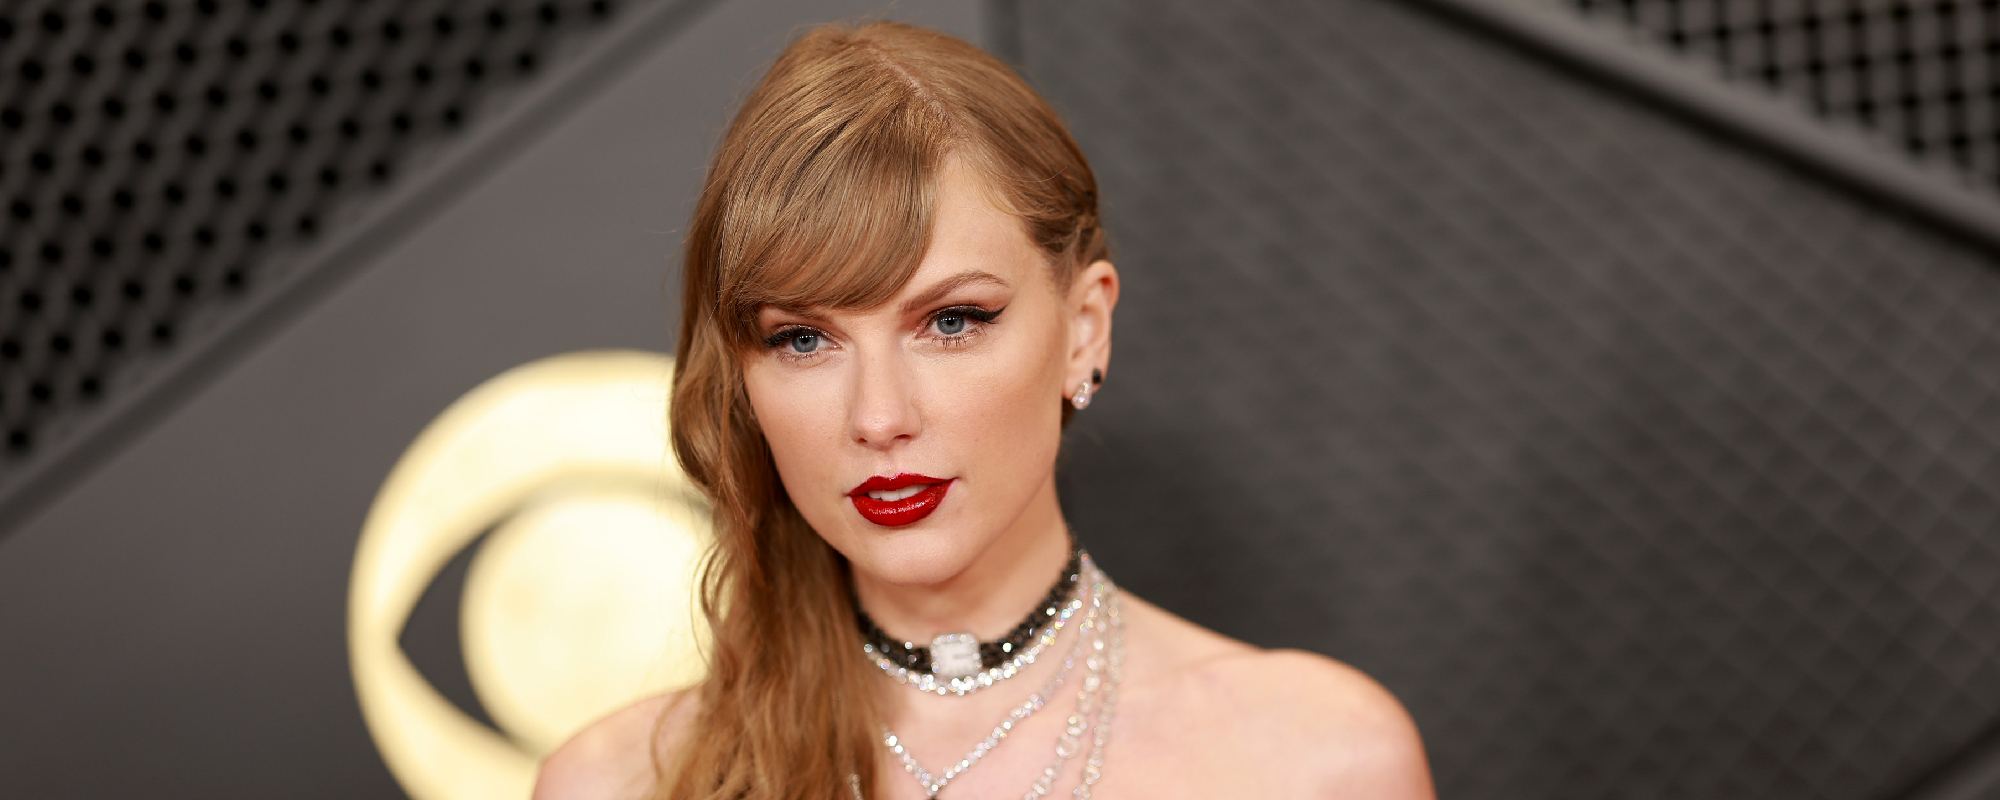 Taylor Swift's Reaction to Miley Cyrus Beating Her for GRAMMY Award Sets Internet Ablaze